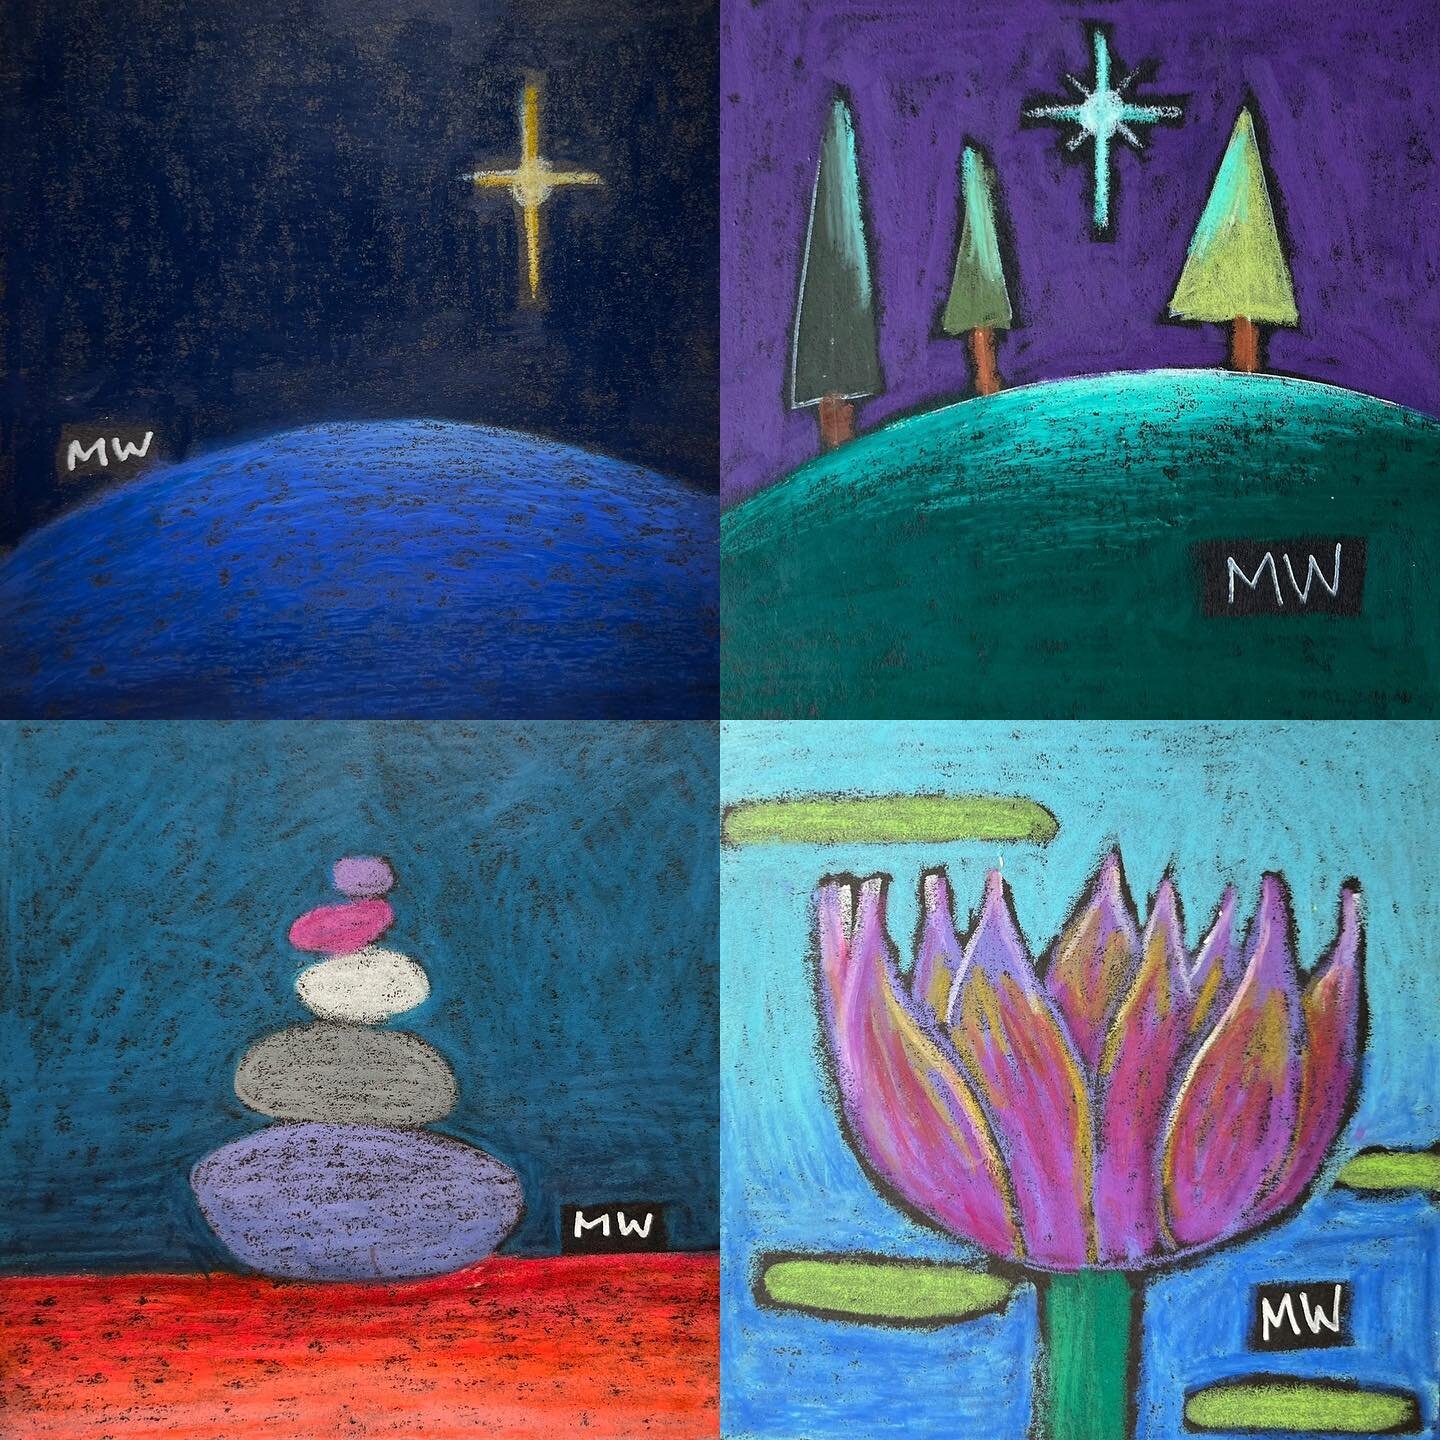 ✨New mini art is now available in my shop! ✨

Stop by and browse the goodness! 

All images shown are 4x4 inches and are created with oil pastel. Such rich colors! Such joyful designs! 

Each piece is under $20! Perfect for Christmas gifts! 

Www.mar